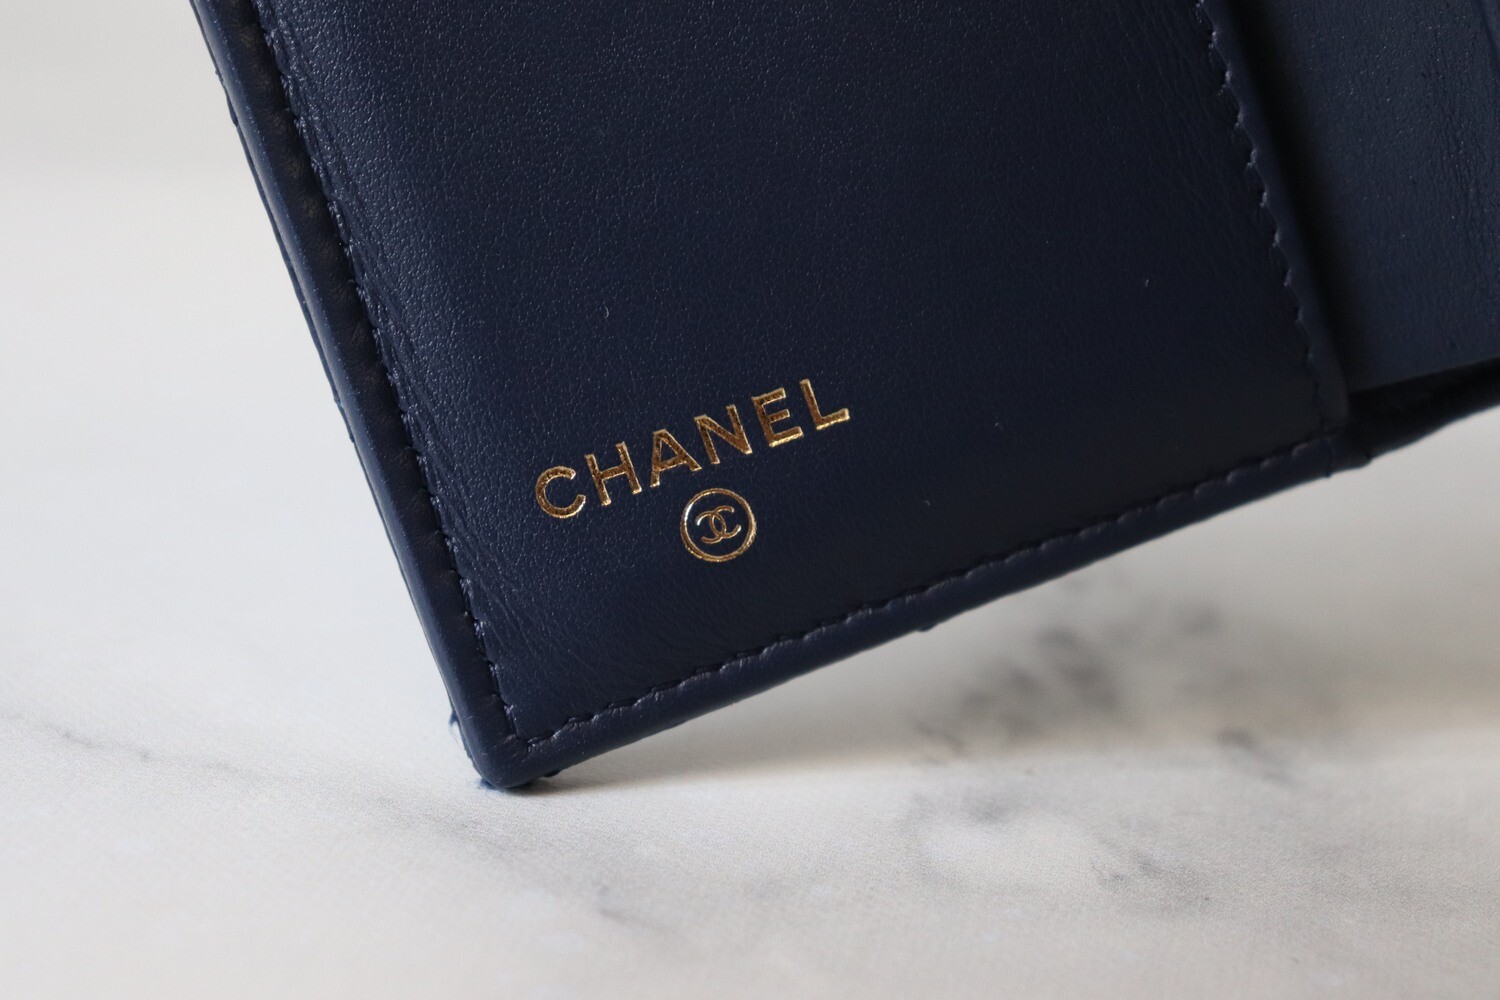 Authentic Chanel Trifold Wallet Caviar Leather